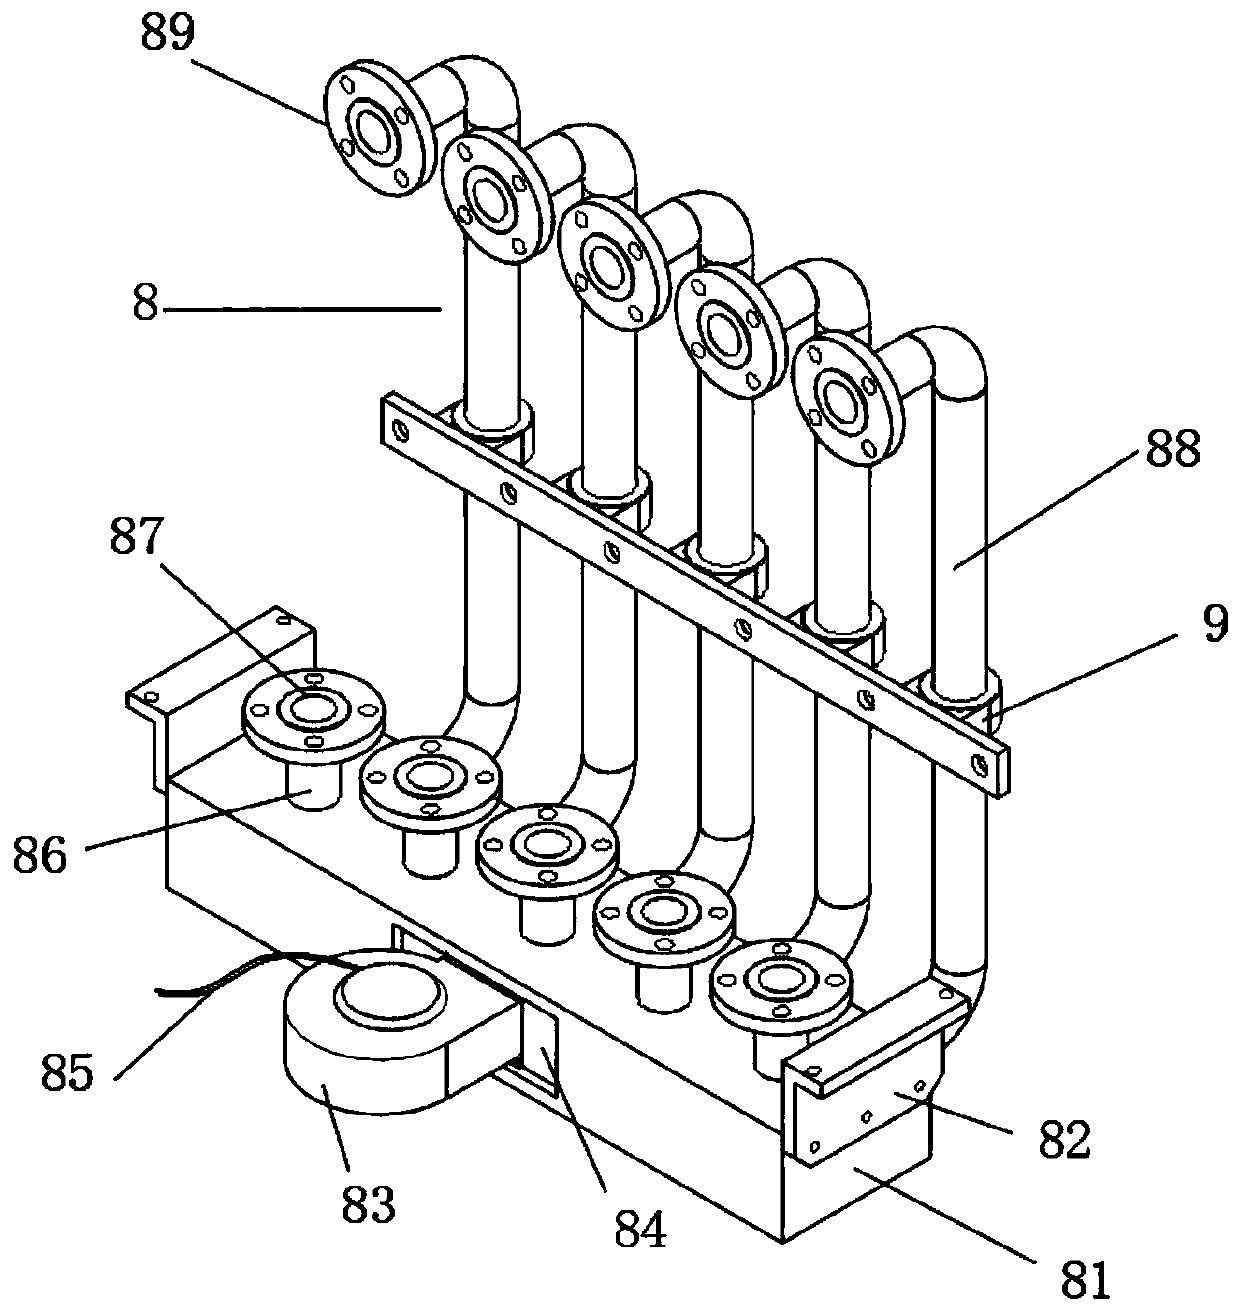 Protection structure of inverter device for electric vehicle